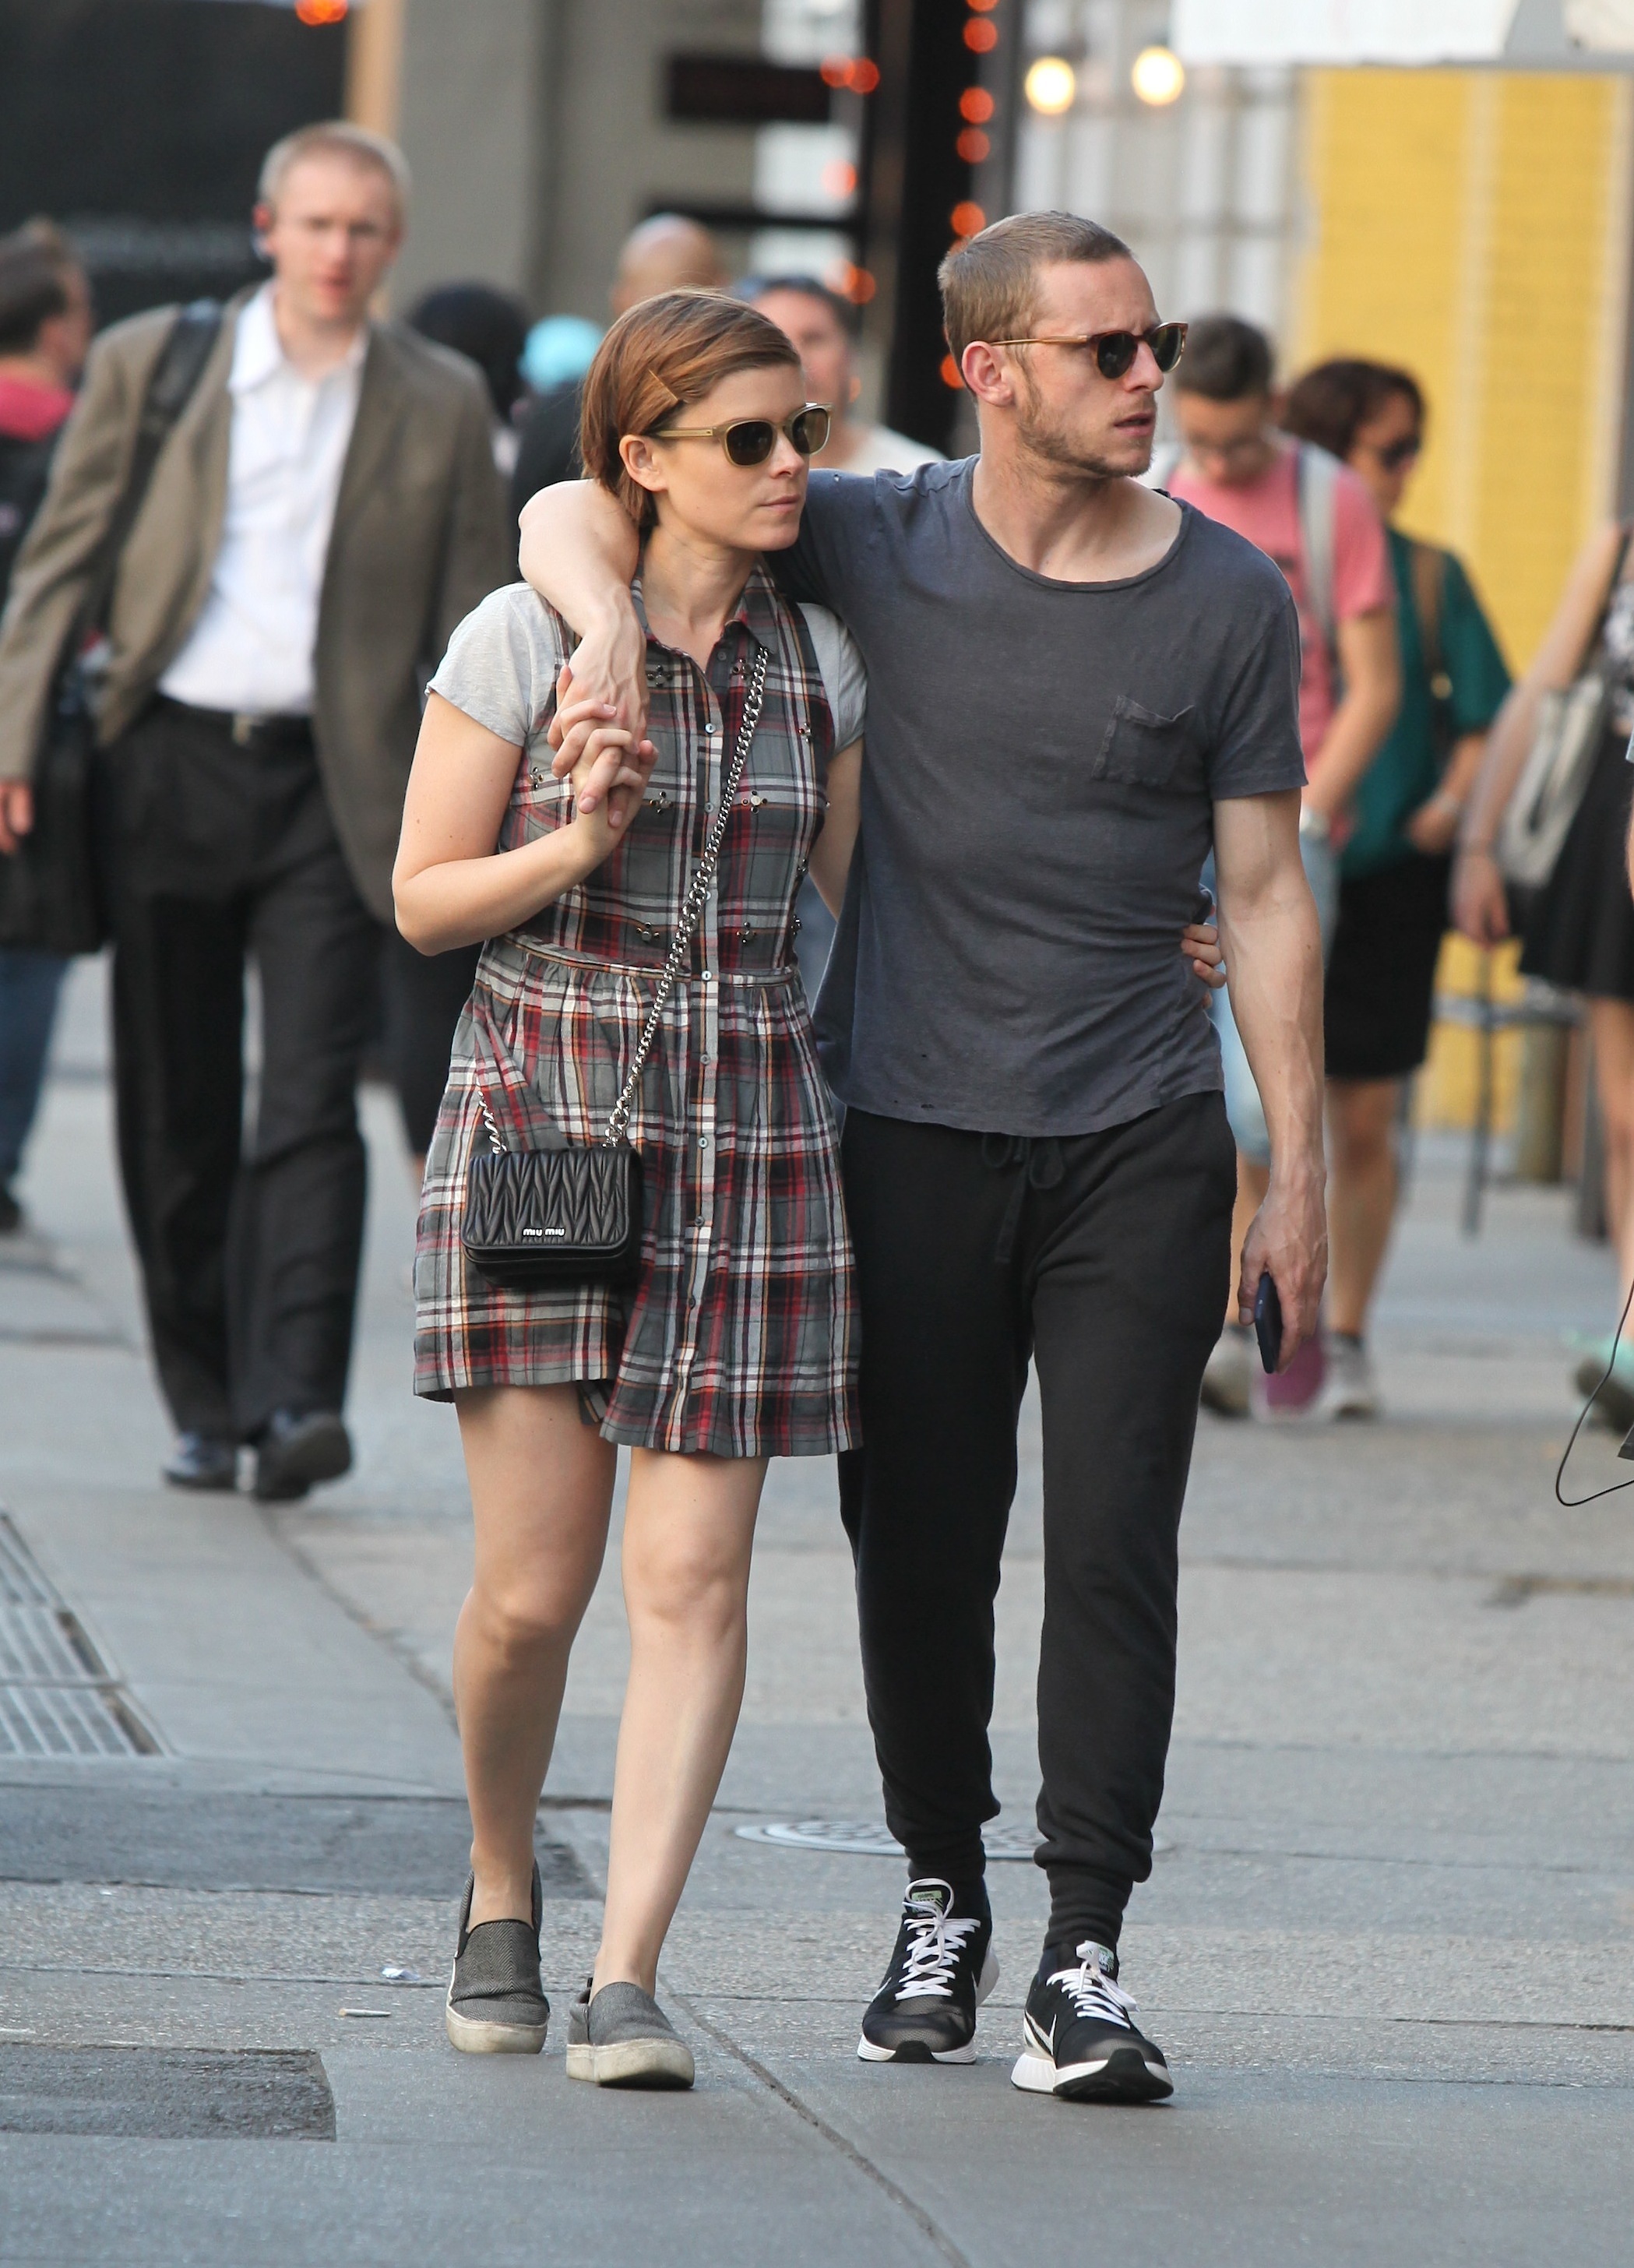 Kate Mara, Jamie Bell & more celebrity photos out and about | Gallery ...